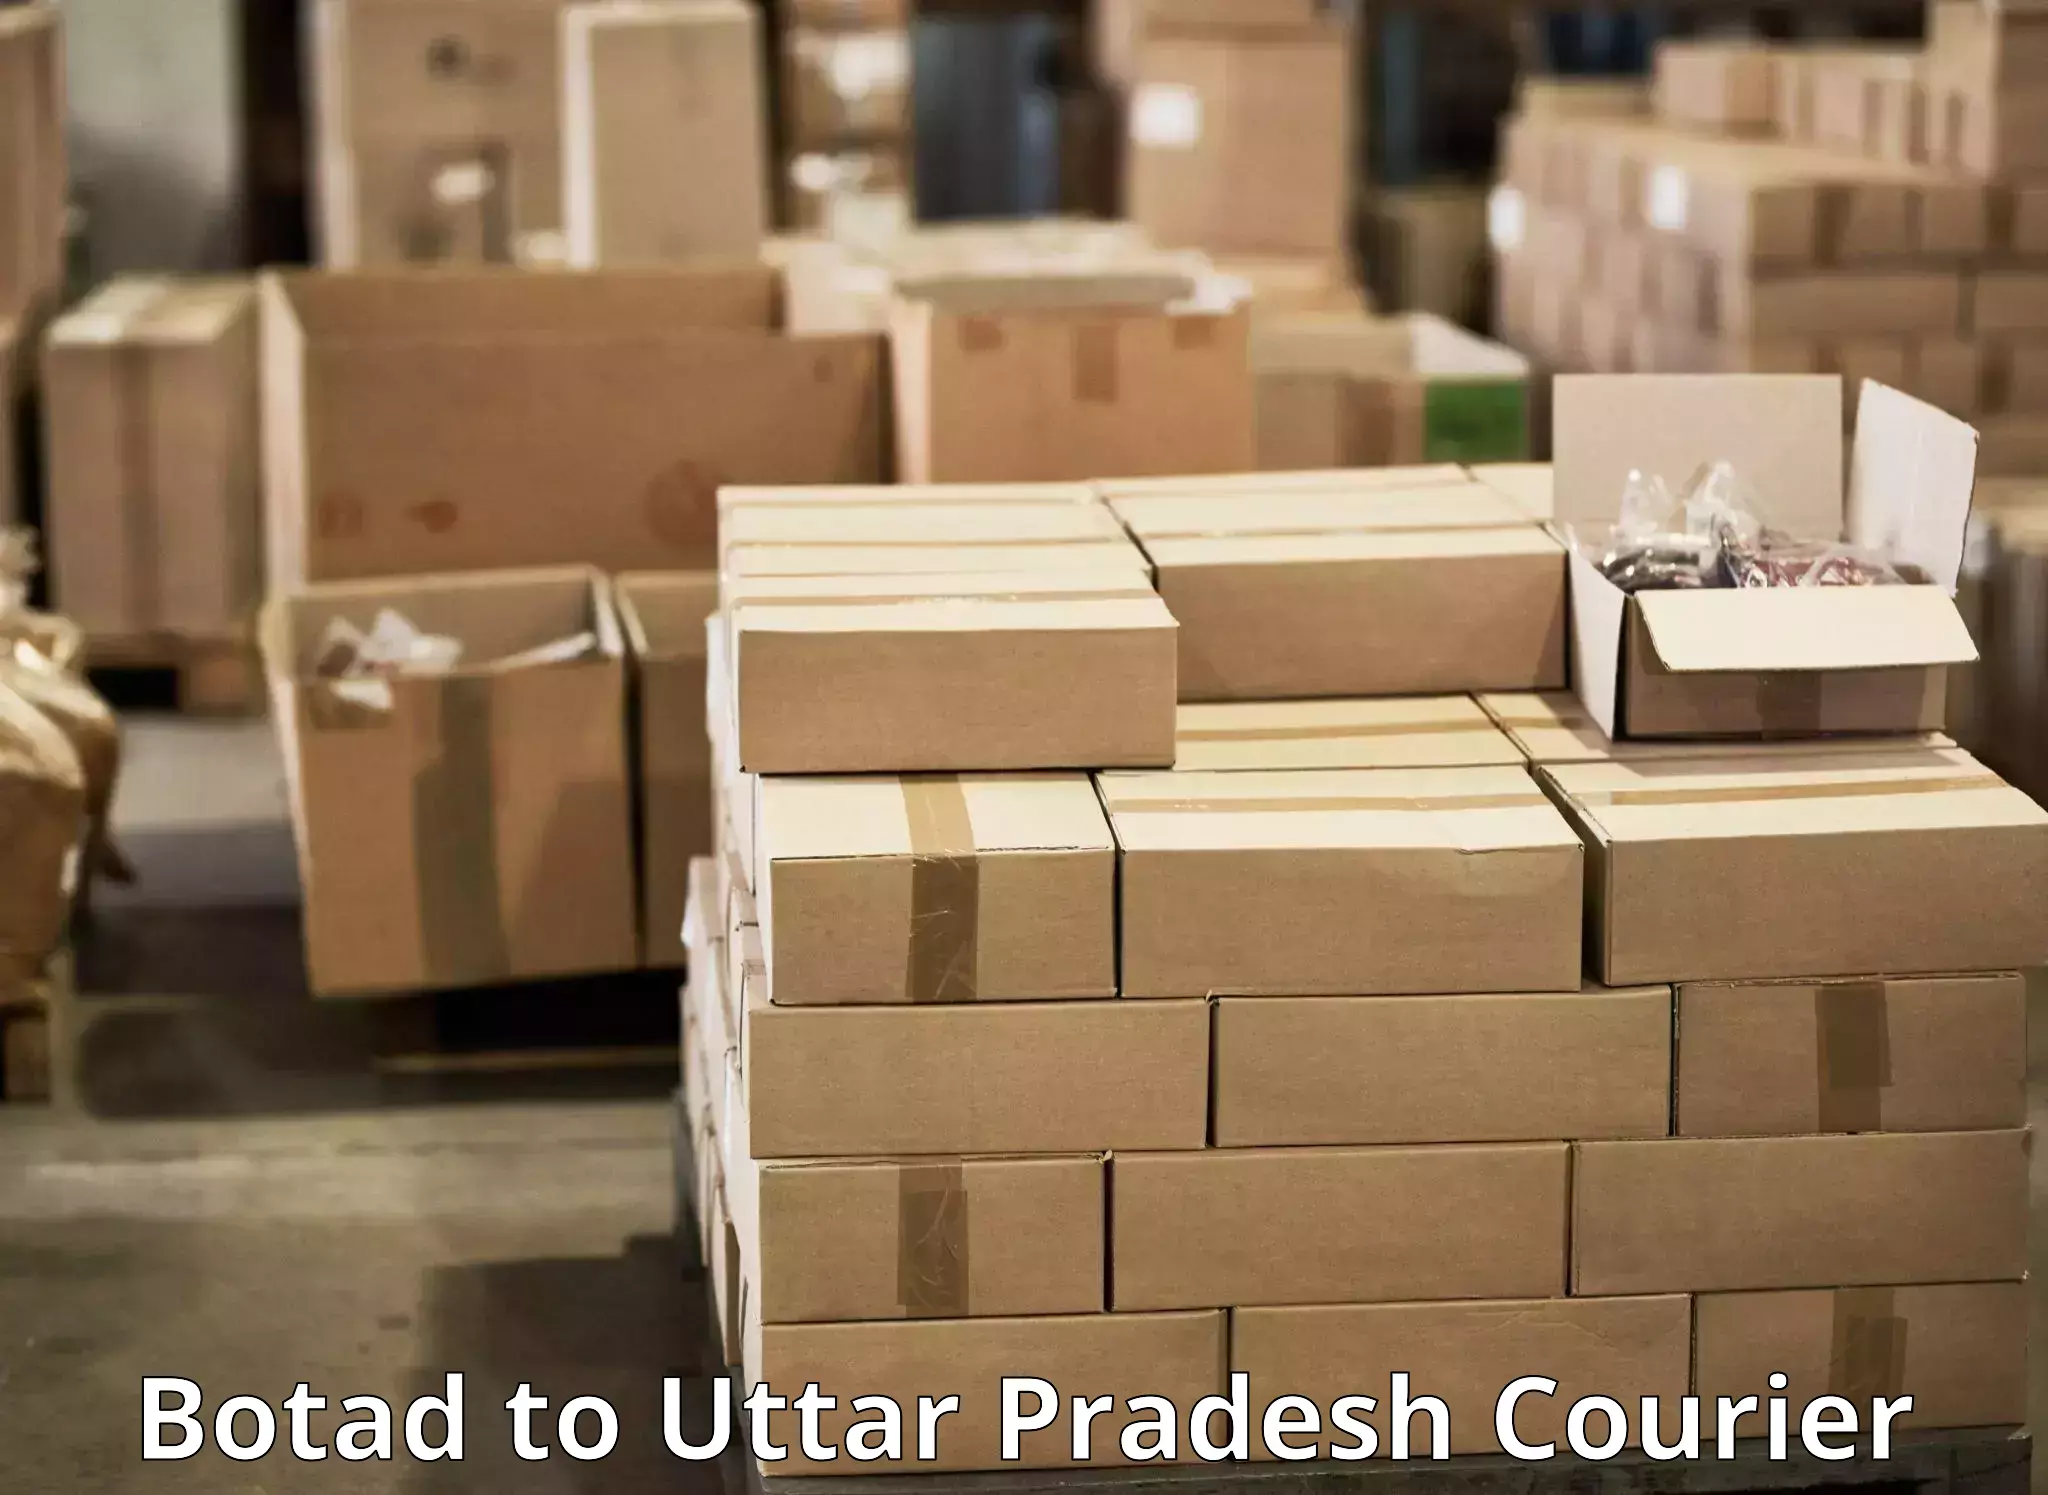 Full-service courier options in Botad to Chandausi